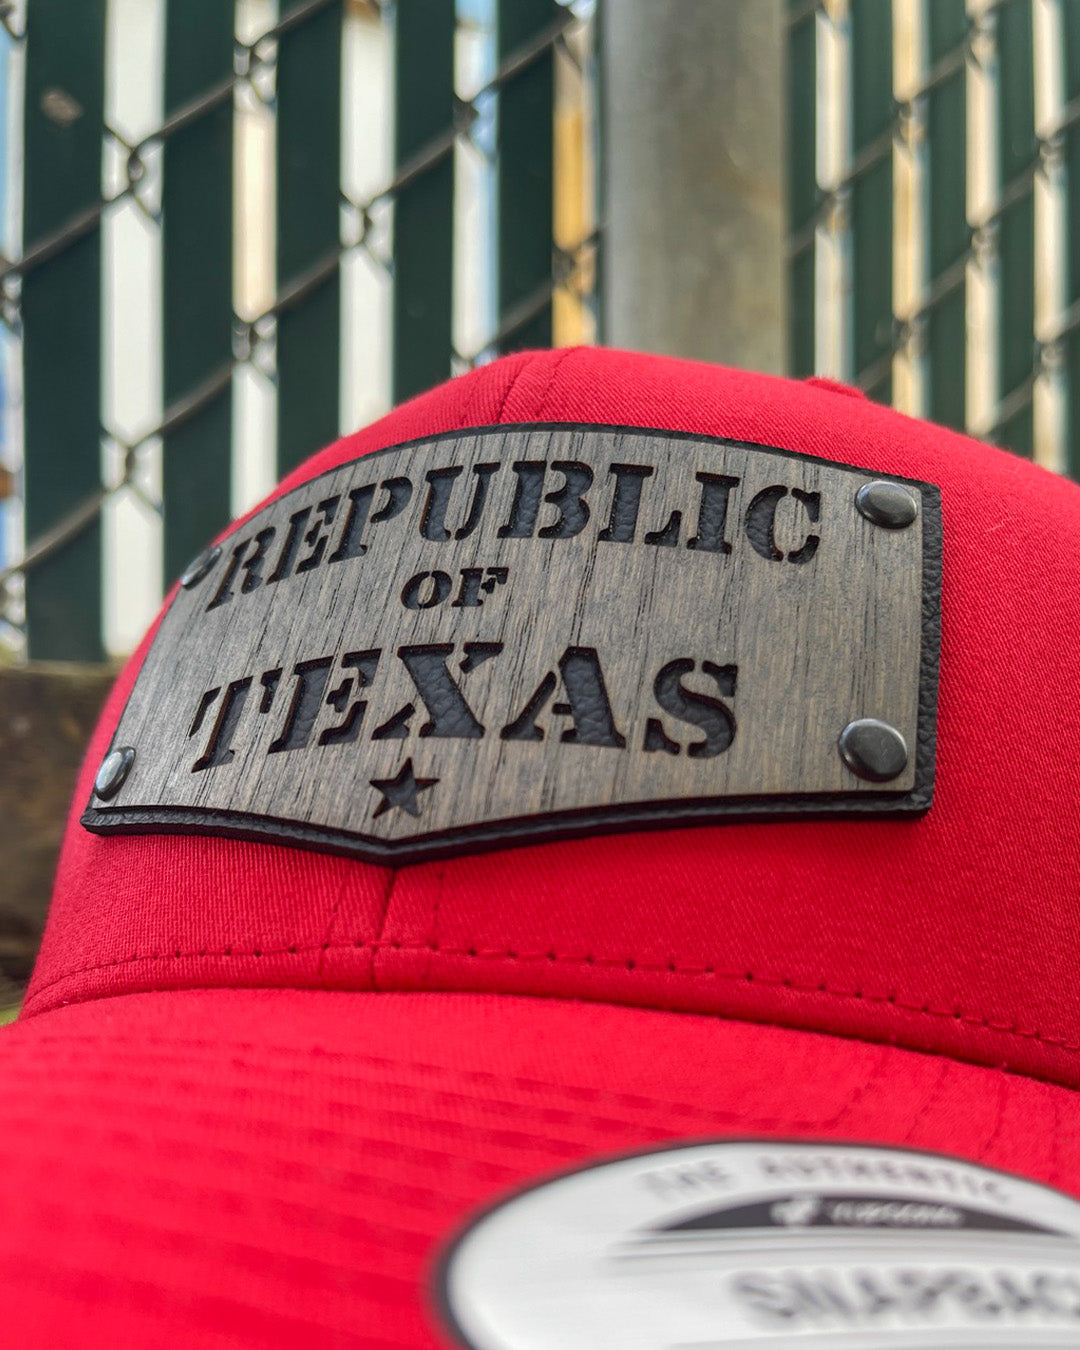 Republic of Texas Customized Hats Promotional Caps Embroidered Hats Yupoong Richardson 112 Cheap Custom Apparel